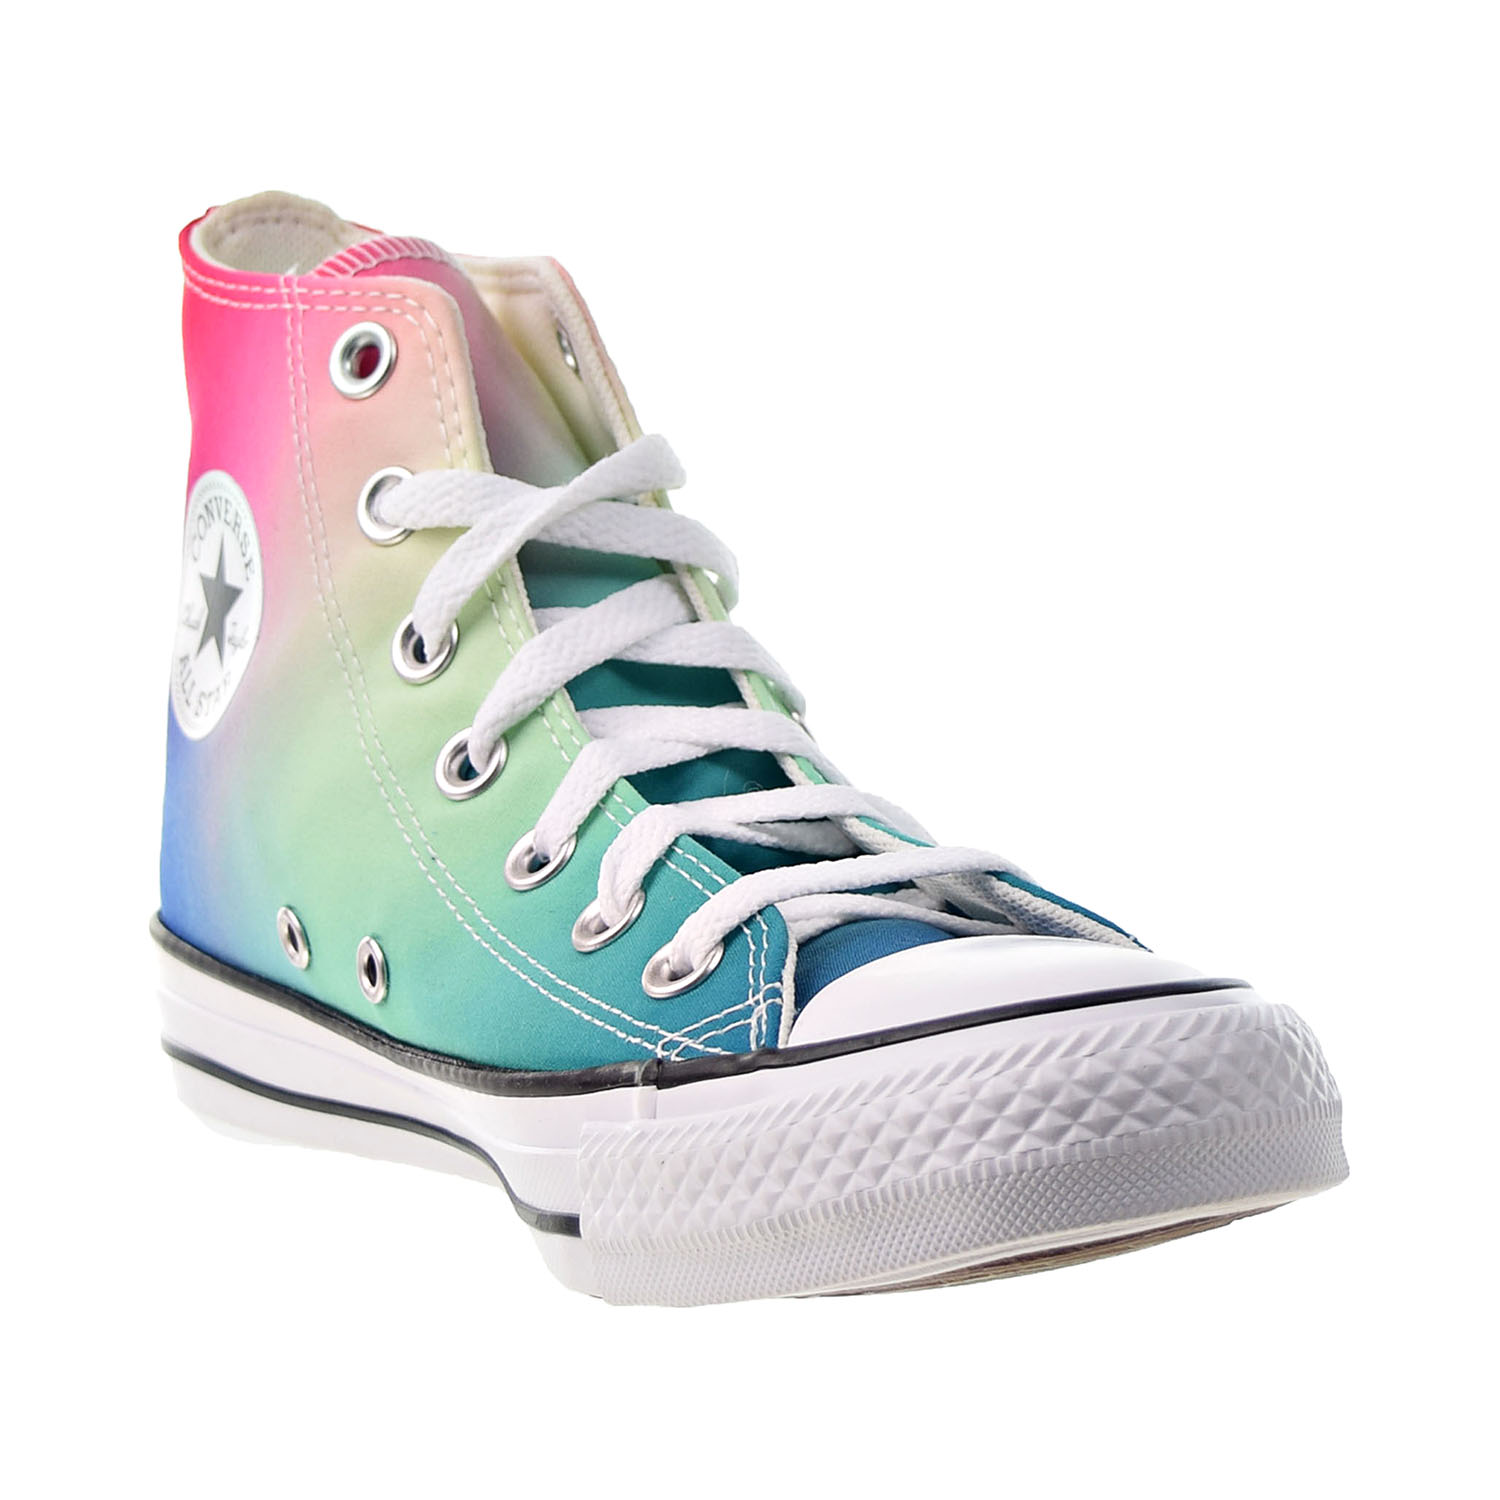 Converse Chuck Taylor All Star Hi "Psychadelic Hoops" Men's Shoes White 167592c - image 2 of 6